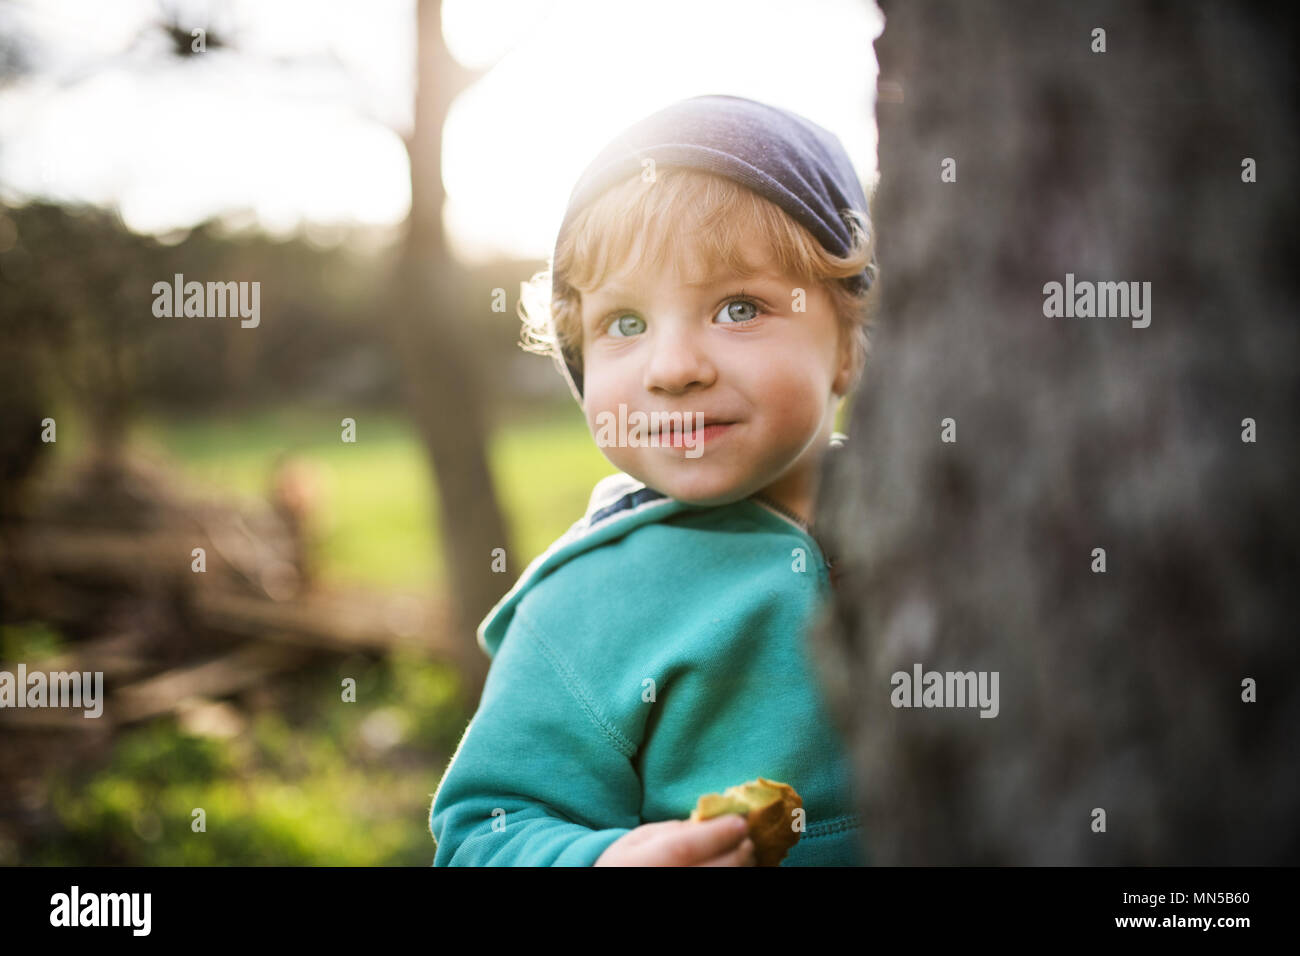 A happy toddler boy hiding behind the tree outside in spring nature. Stock Photo